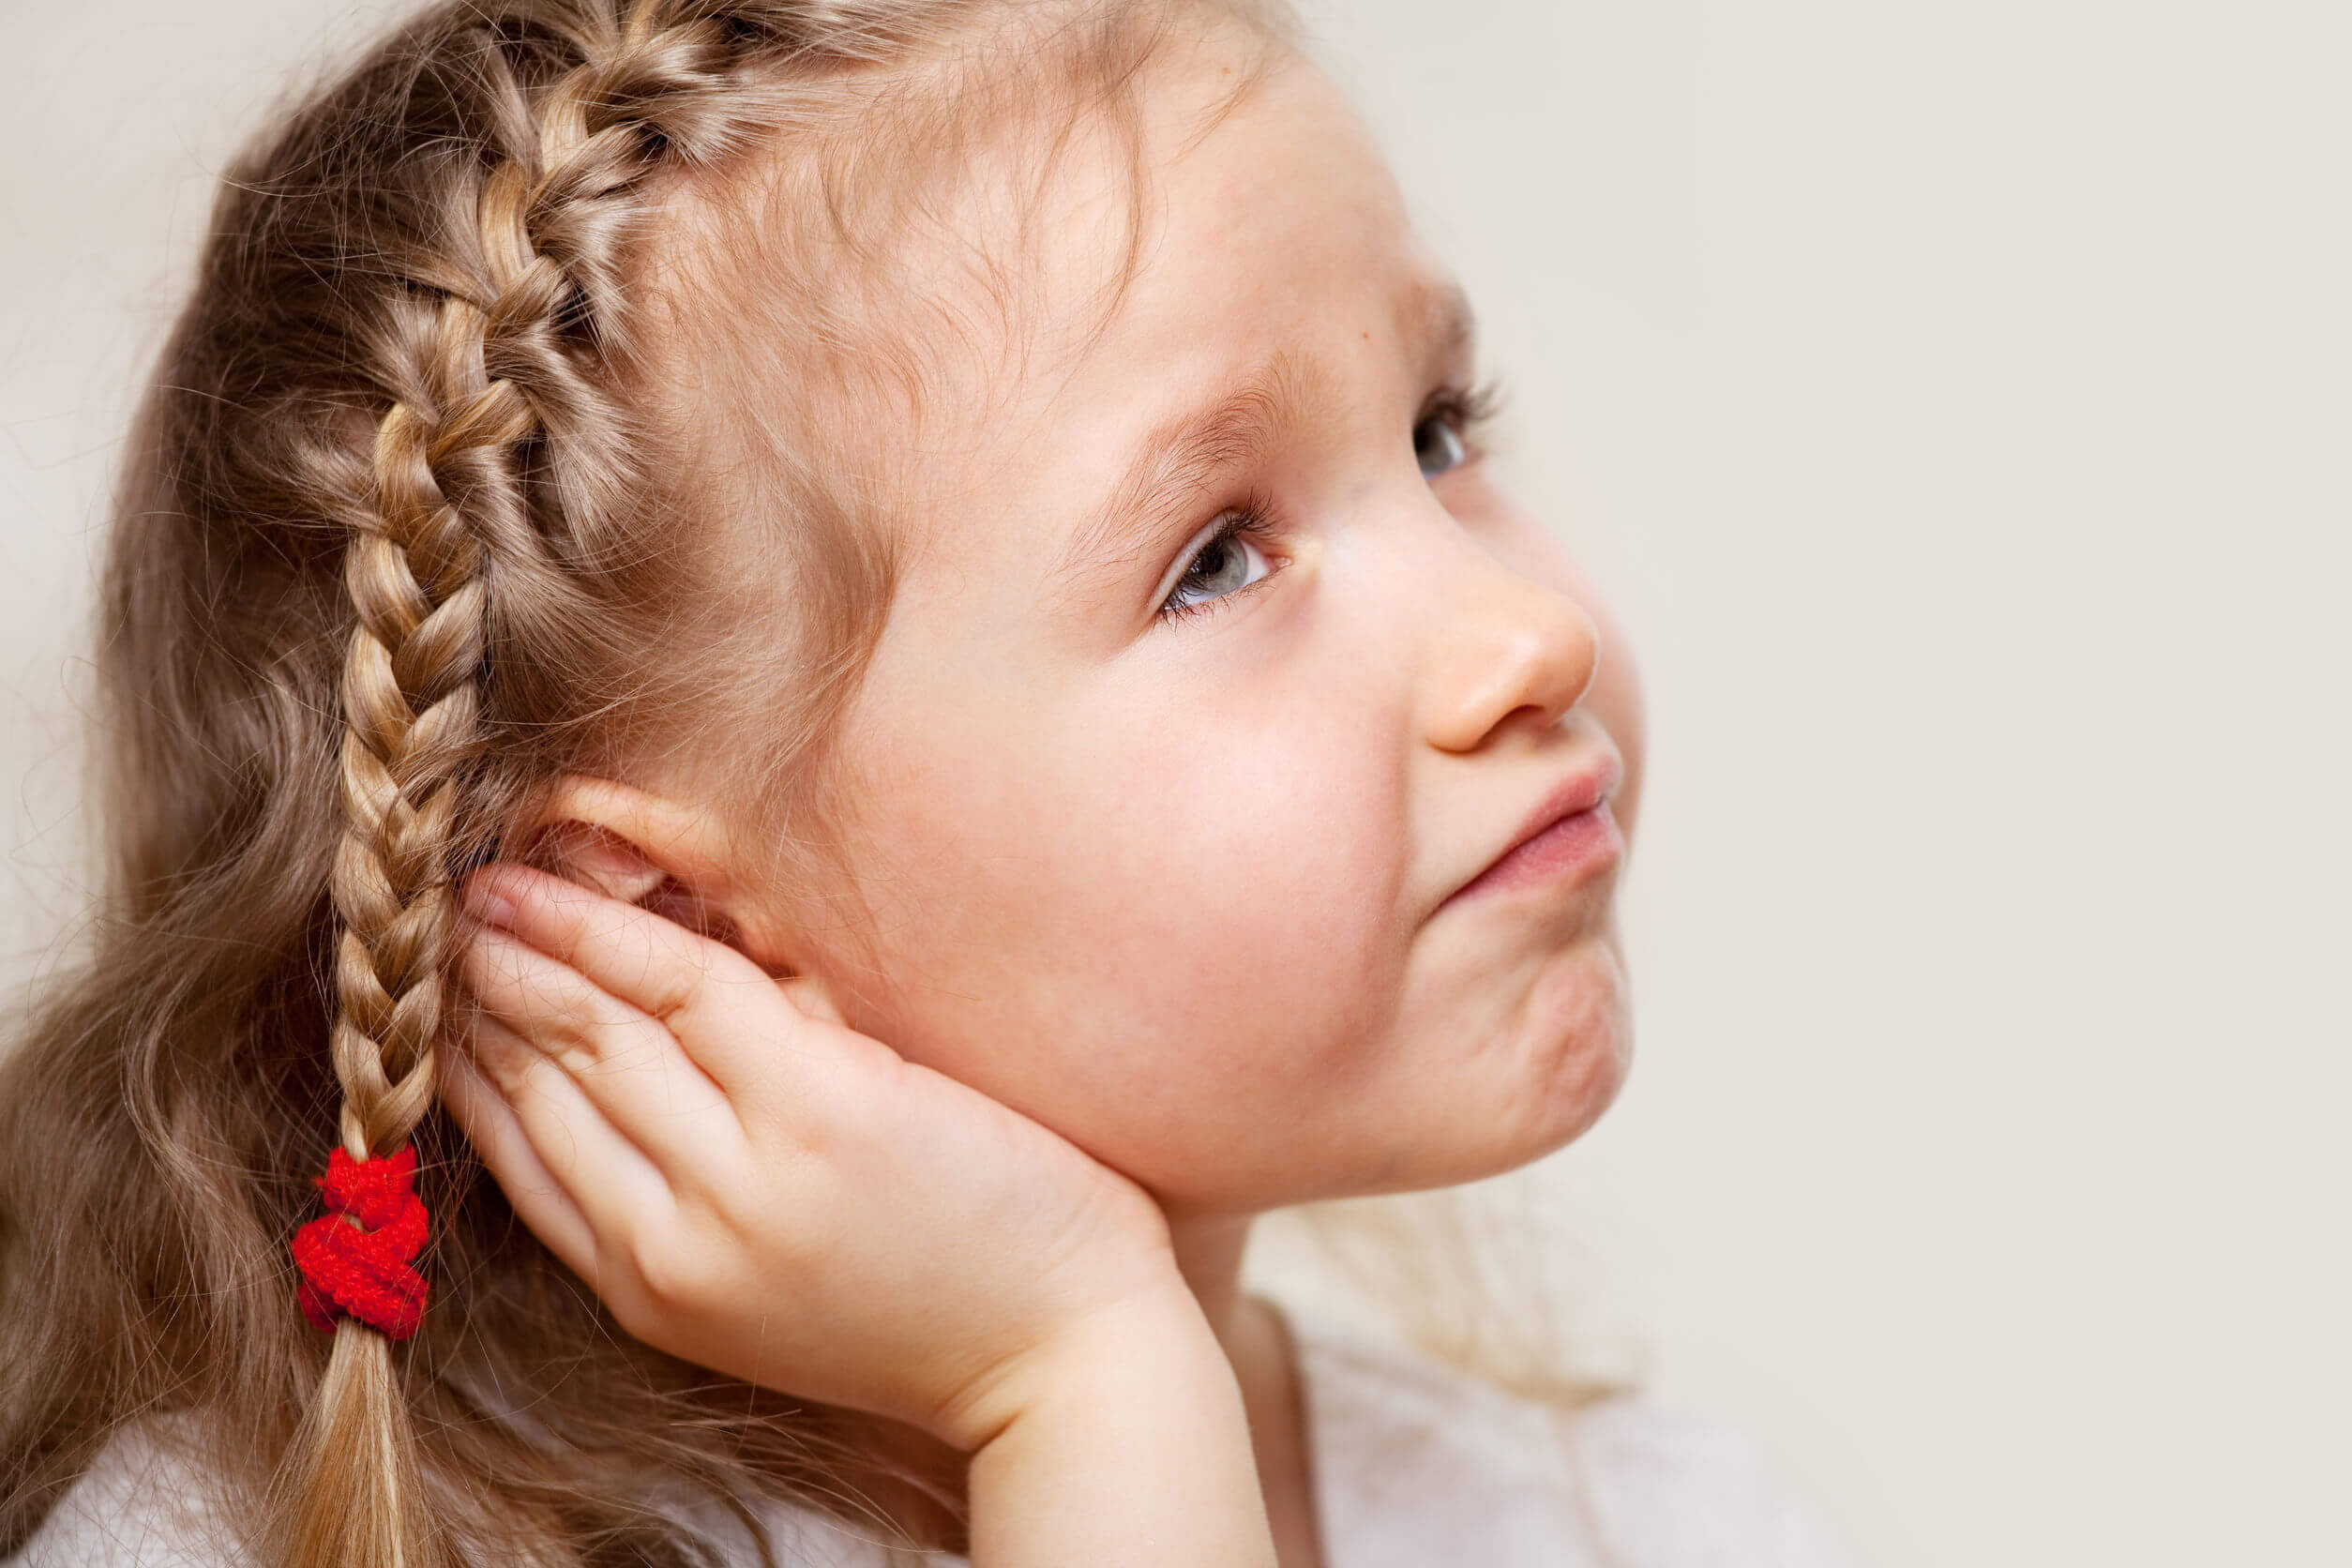 Otitis is one of the most common ear diseases.